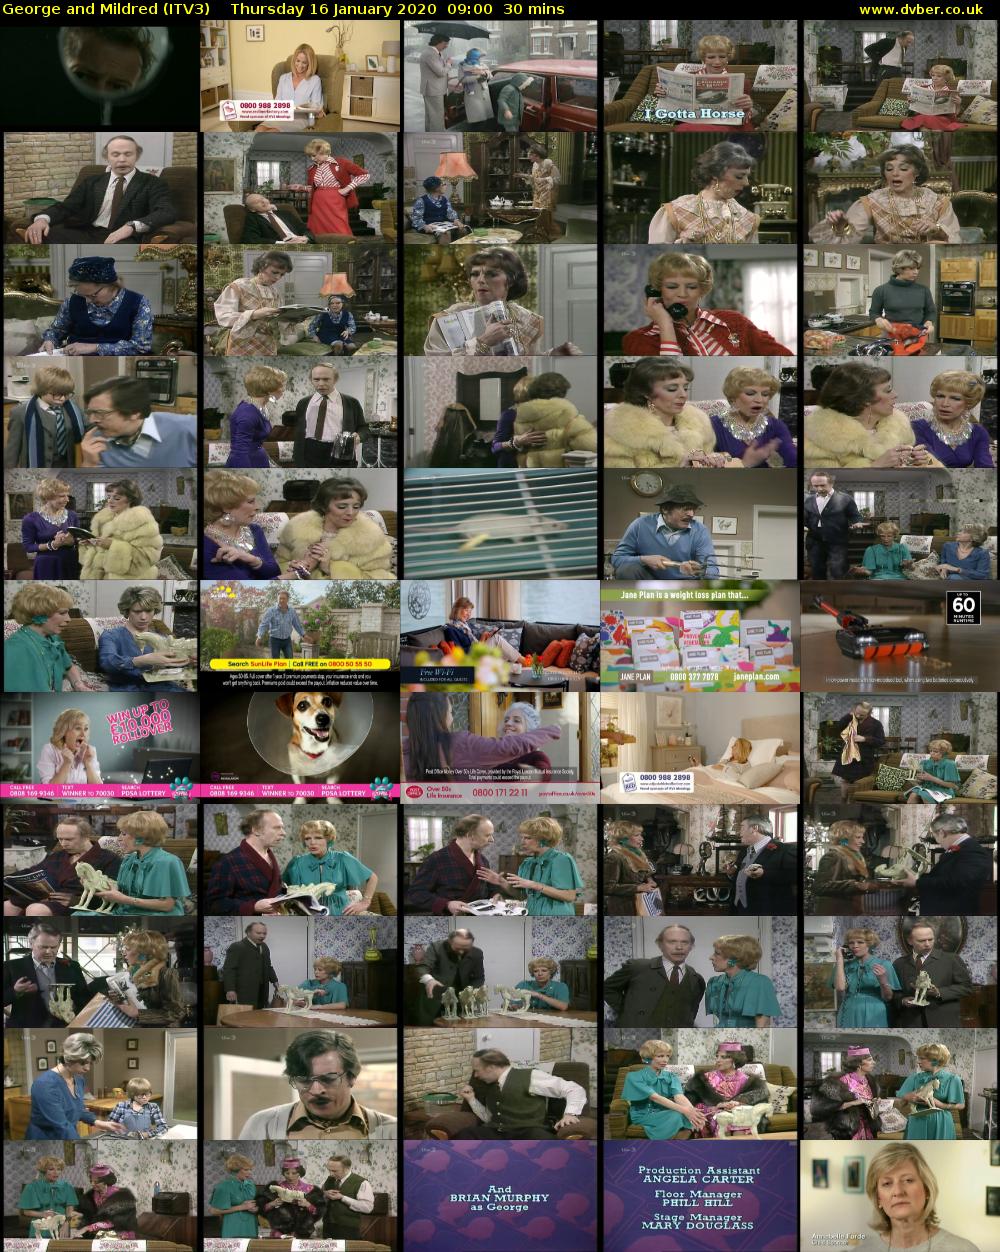 George and Mildred (ITV3) Thursday 16 January 2020 09:00 - 09:30